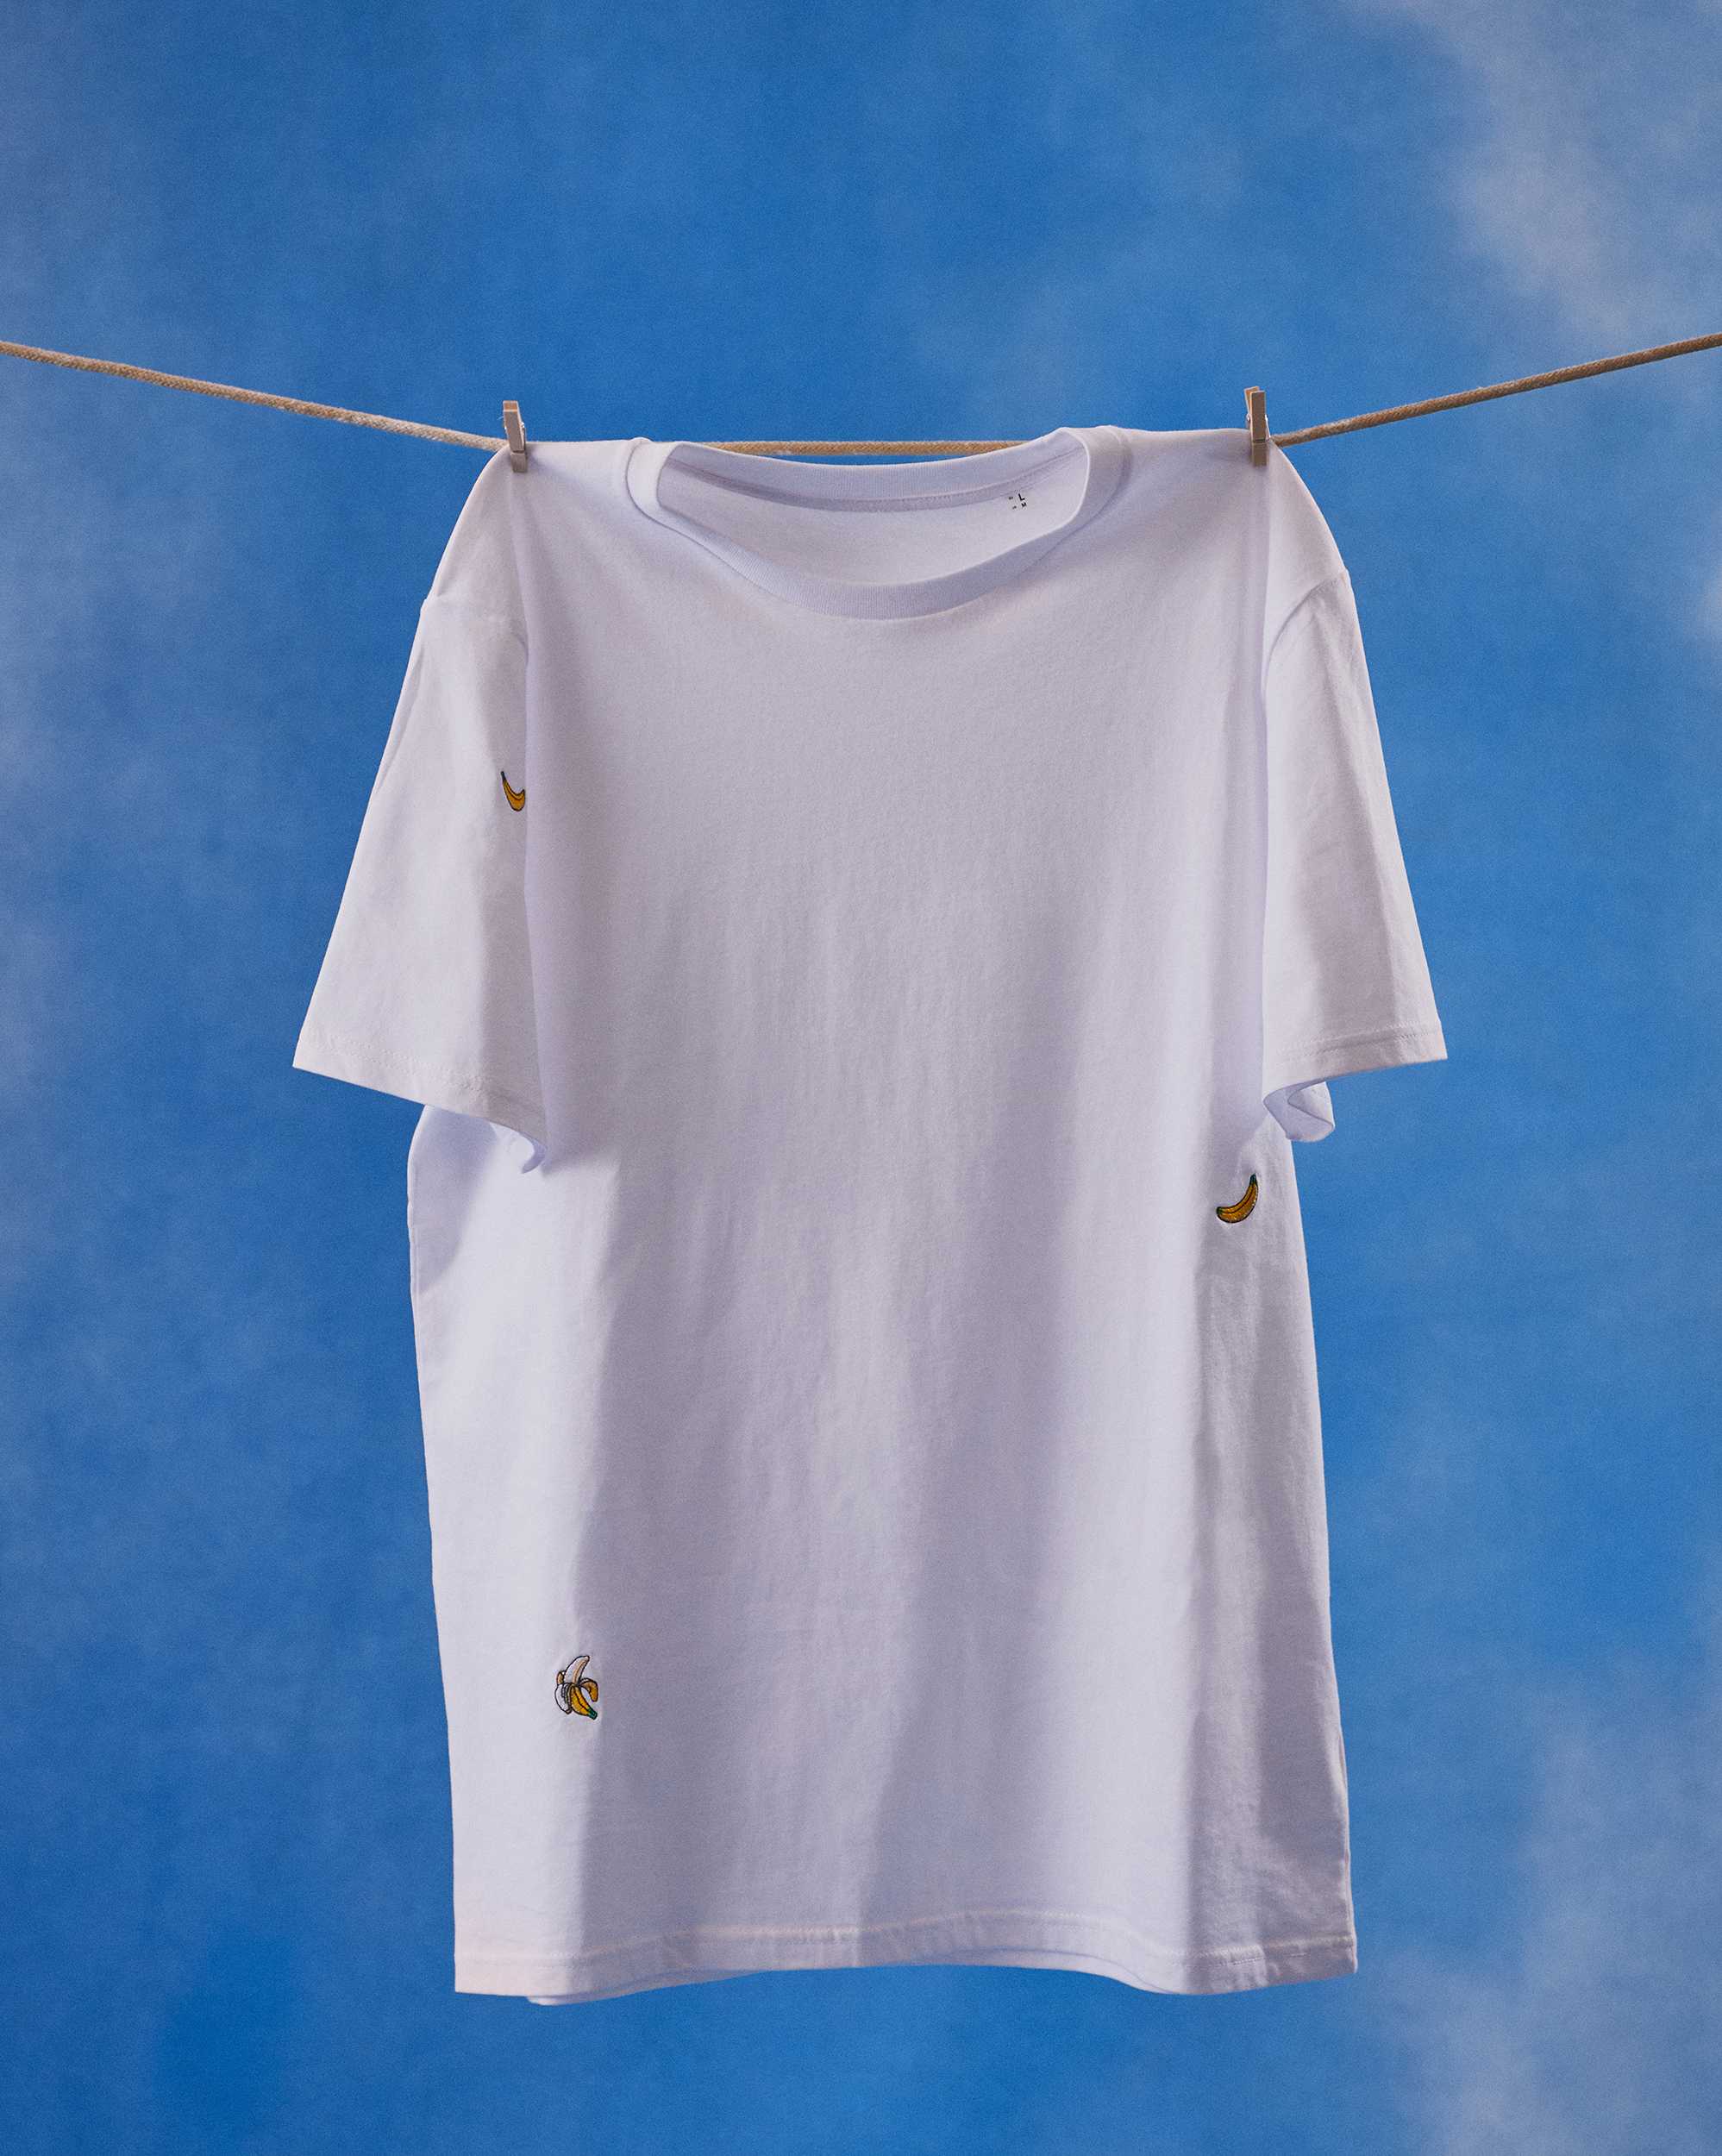 A white t-shirt with banana embroideris haging to dry on a line 